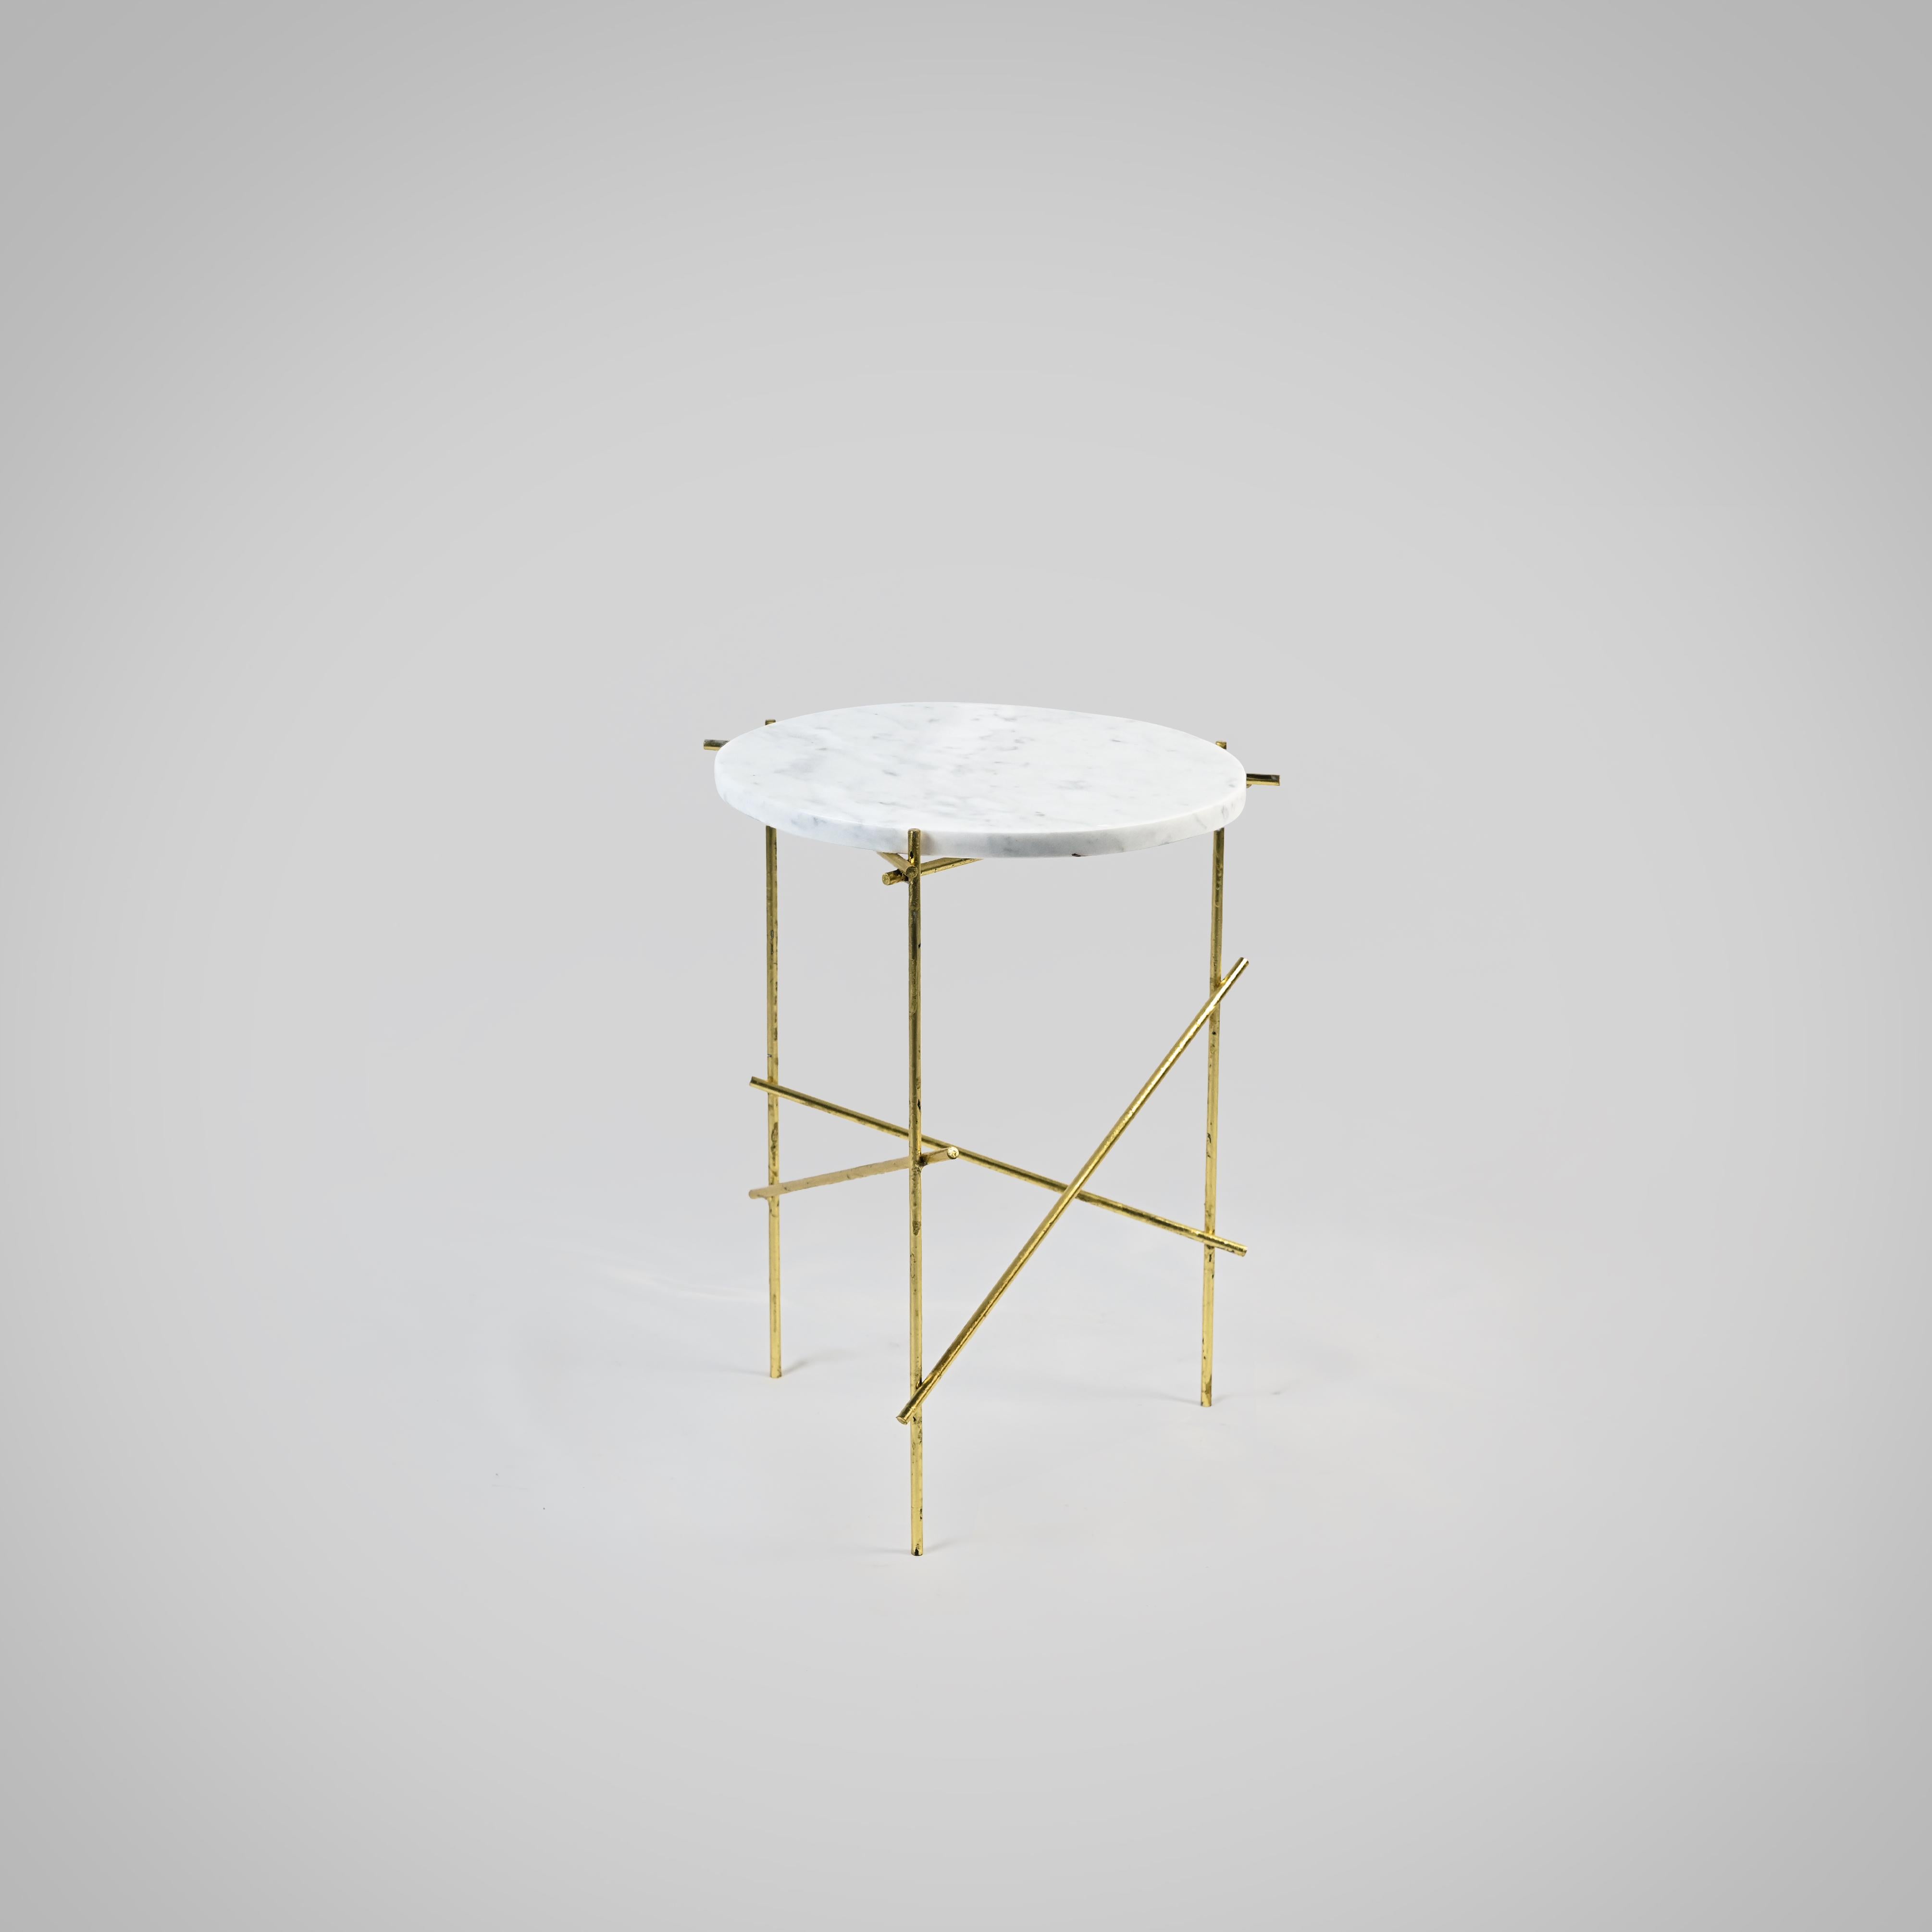 Forged The Slilts, Carrara Marble and Gold Leaf Coffee Tables By DFdesignlab  For Sale